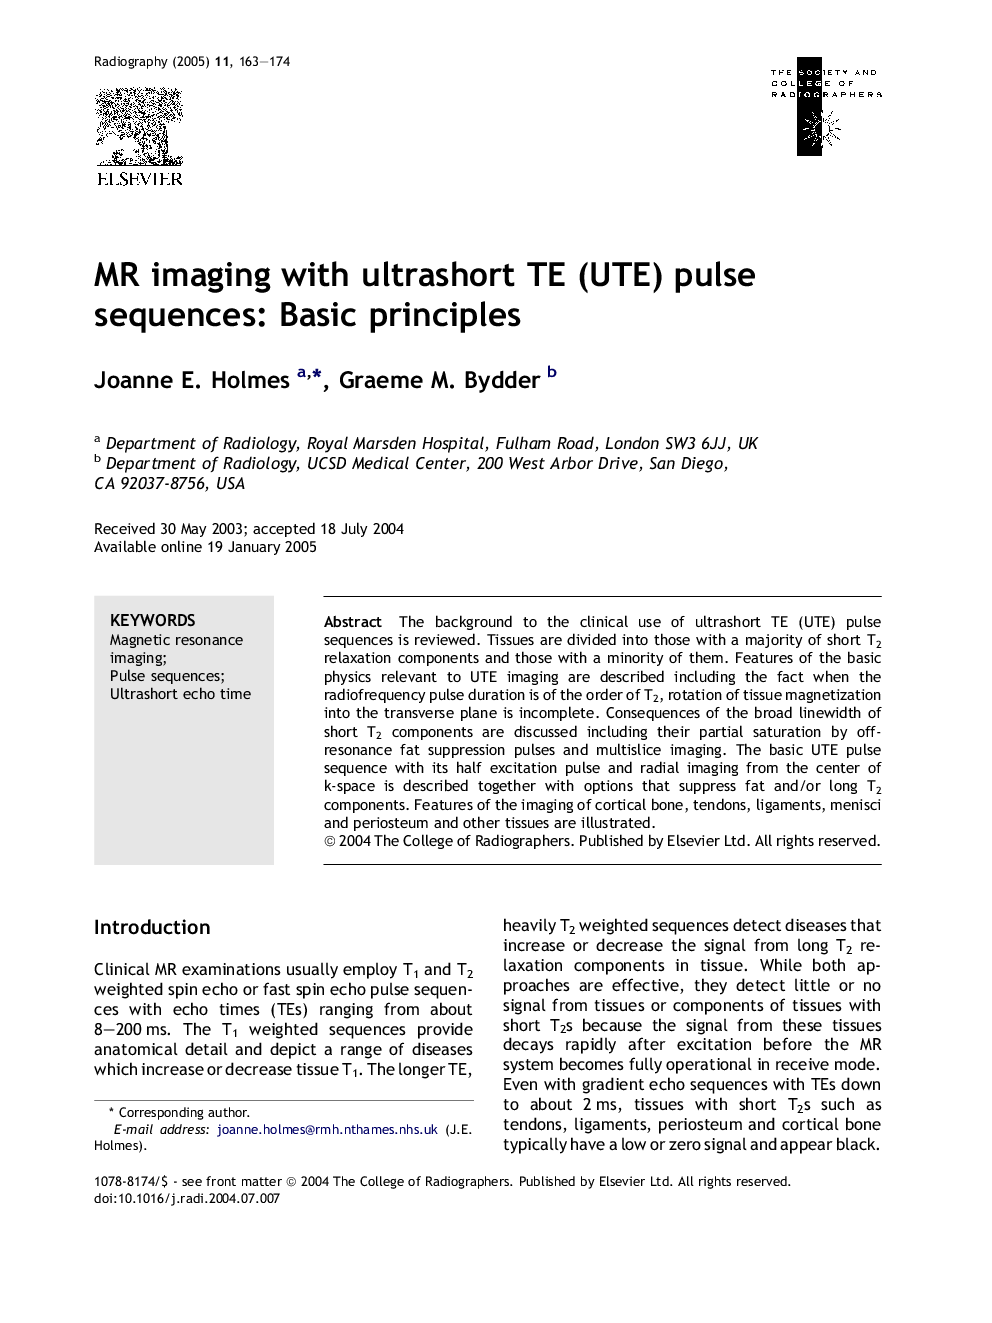 MR imaging with ultrashort TE (UTE) pulse sequences: Basic principles